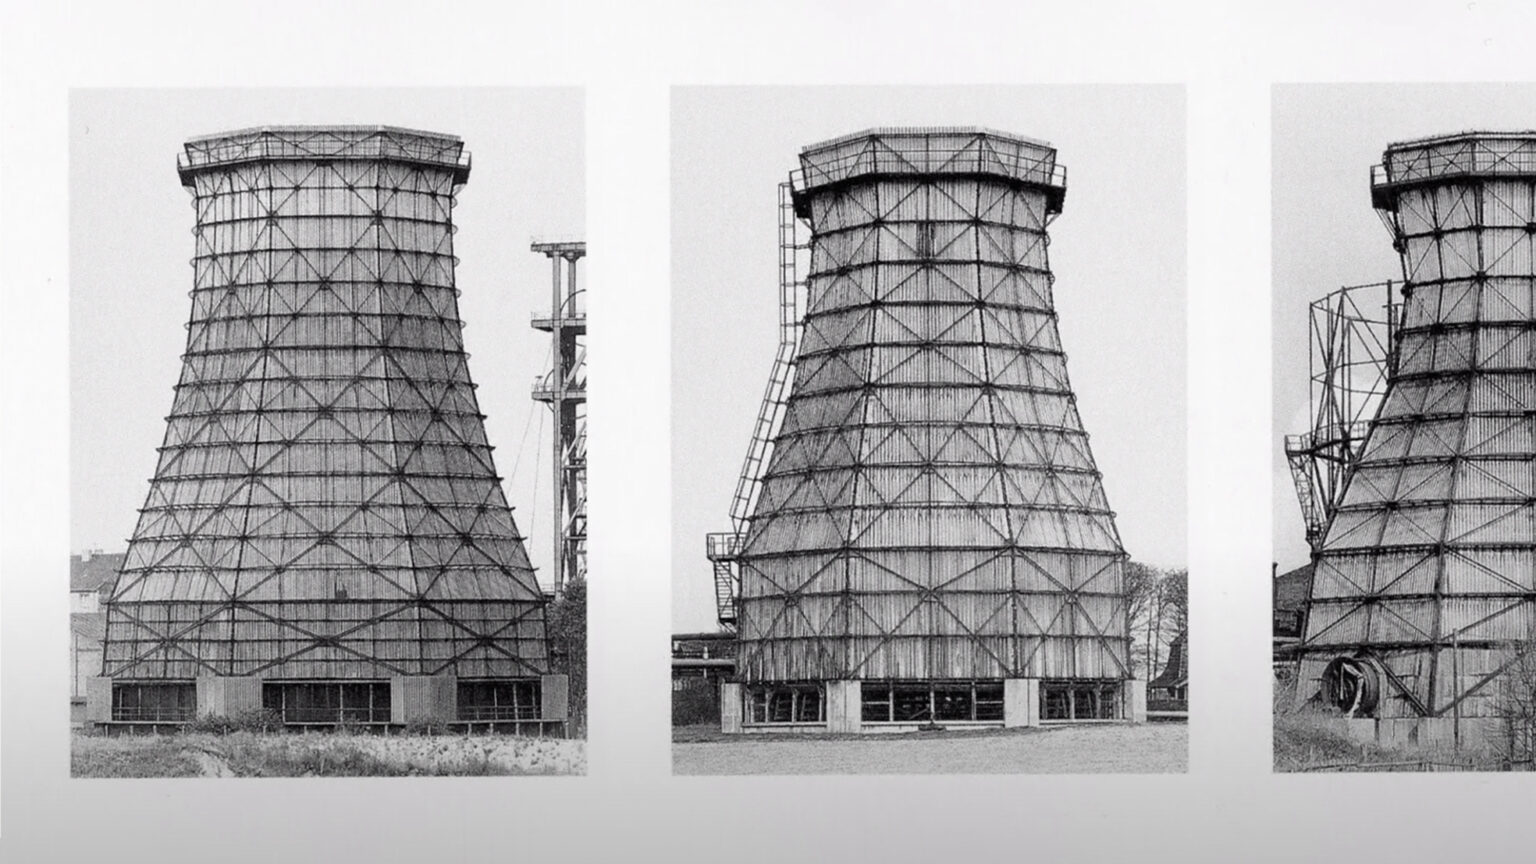 Hilla and Bernd Becher: Pioneers of Industrial Landscape Photography.